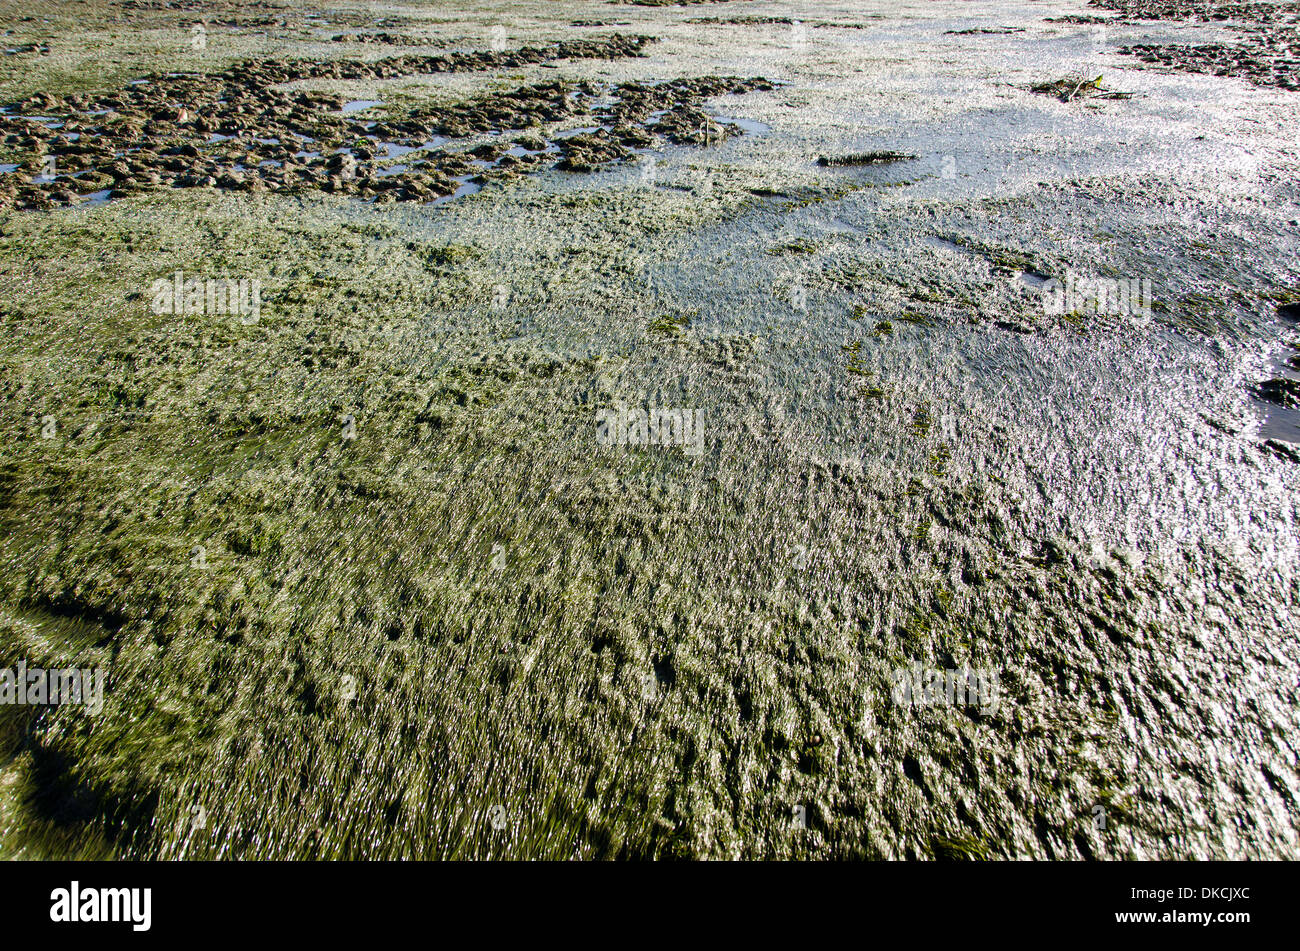 Tidal flat with zostera grass in Albufeira, Portugal Stock Photo